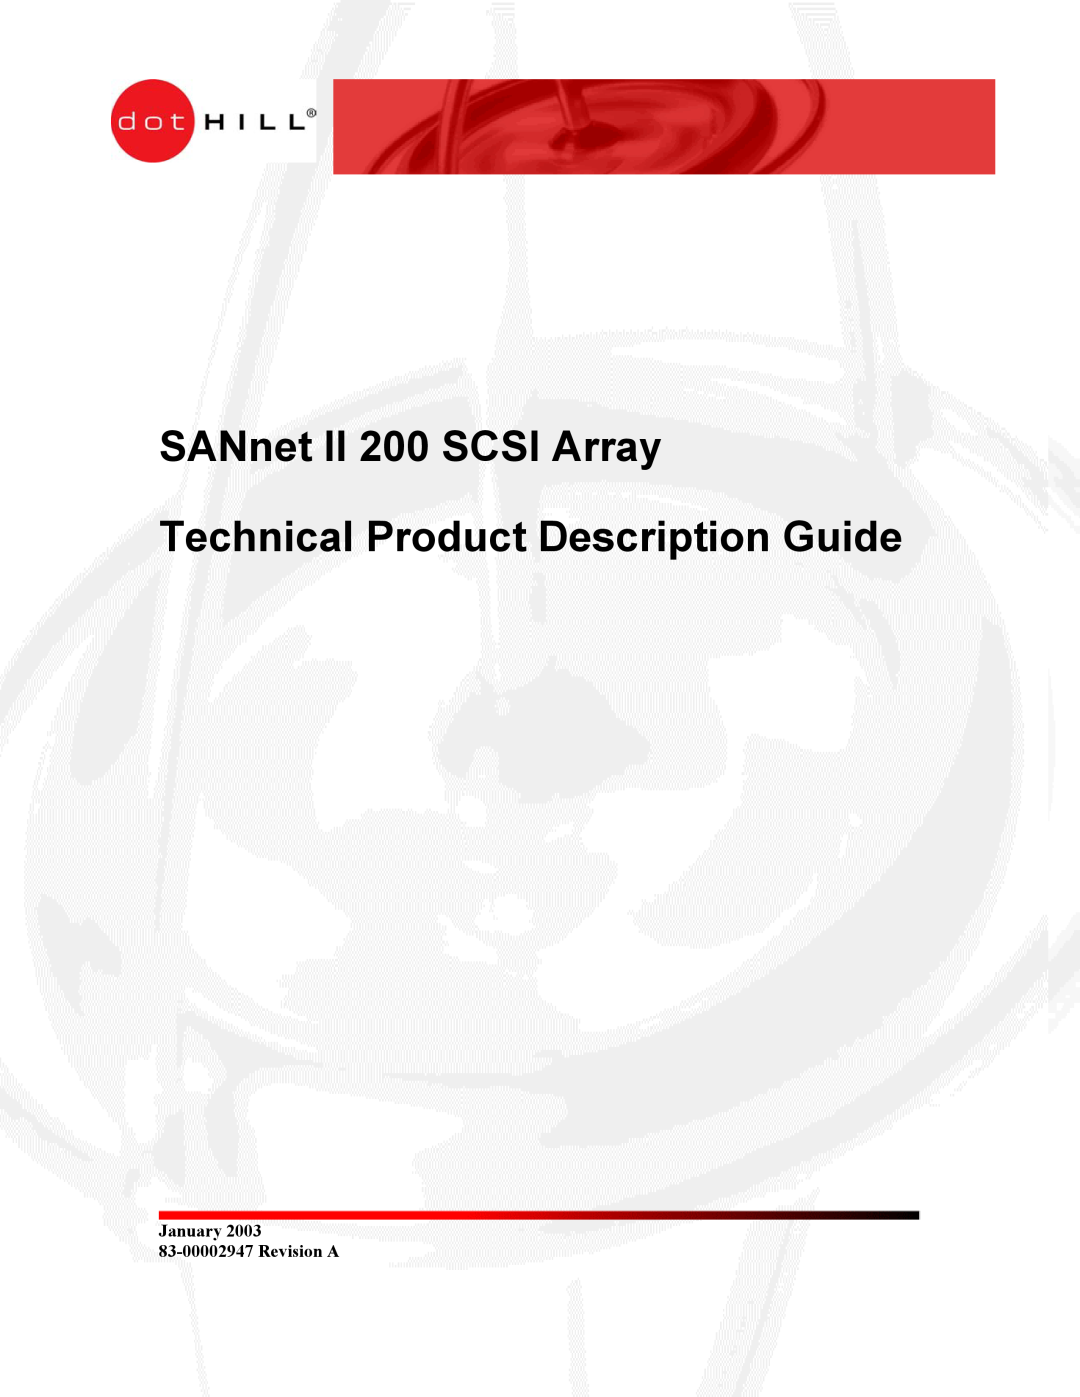 Dot Hill Systems manual SANnet II 200 SCSI Array Technical Product Description Guide, January 83-00002947 Revision A 